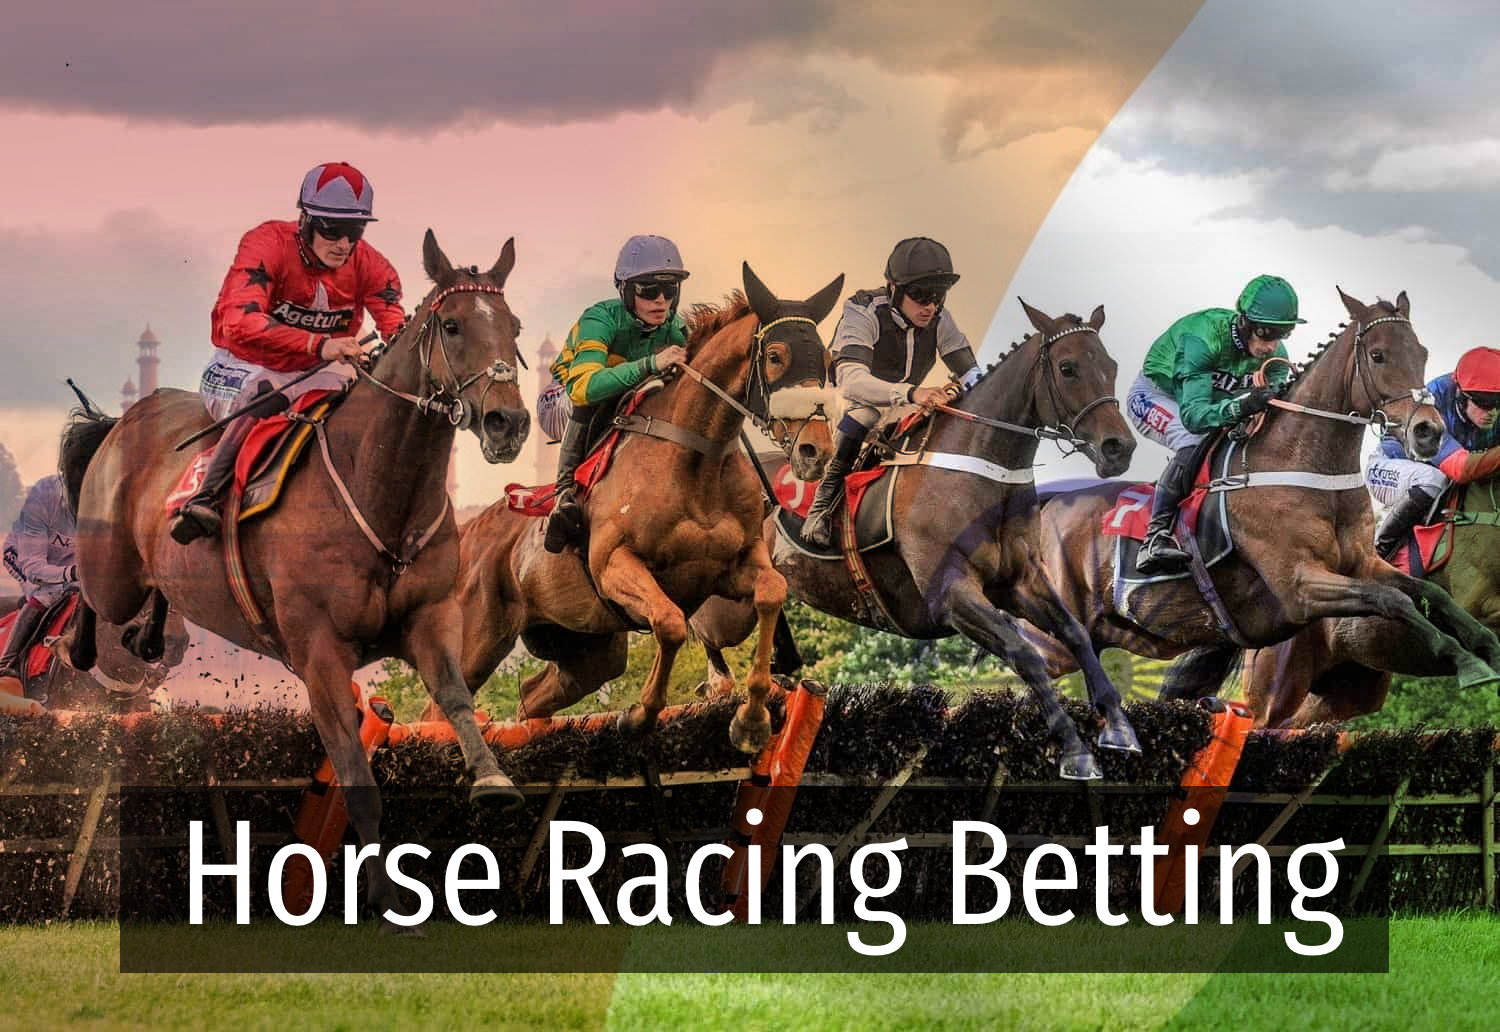 Horse Racing Betting in India